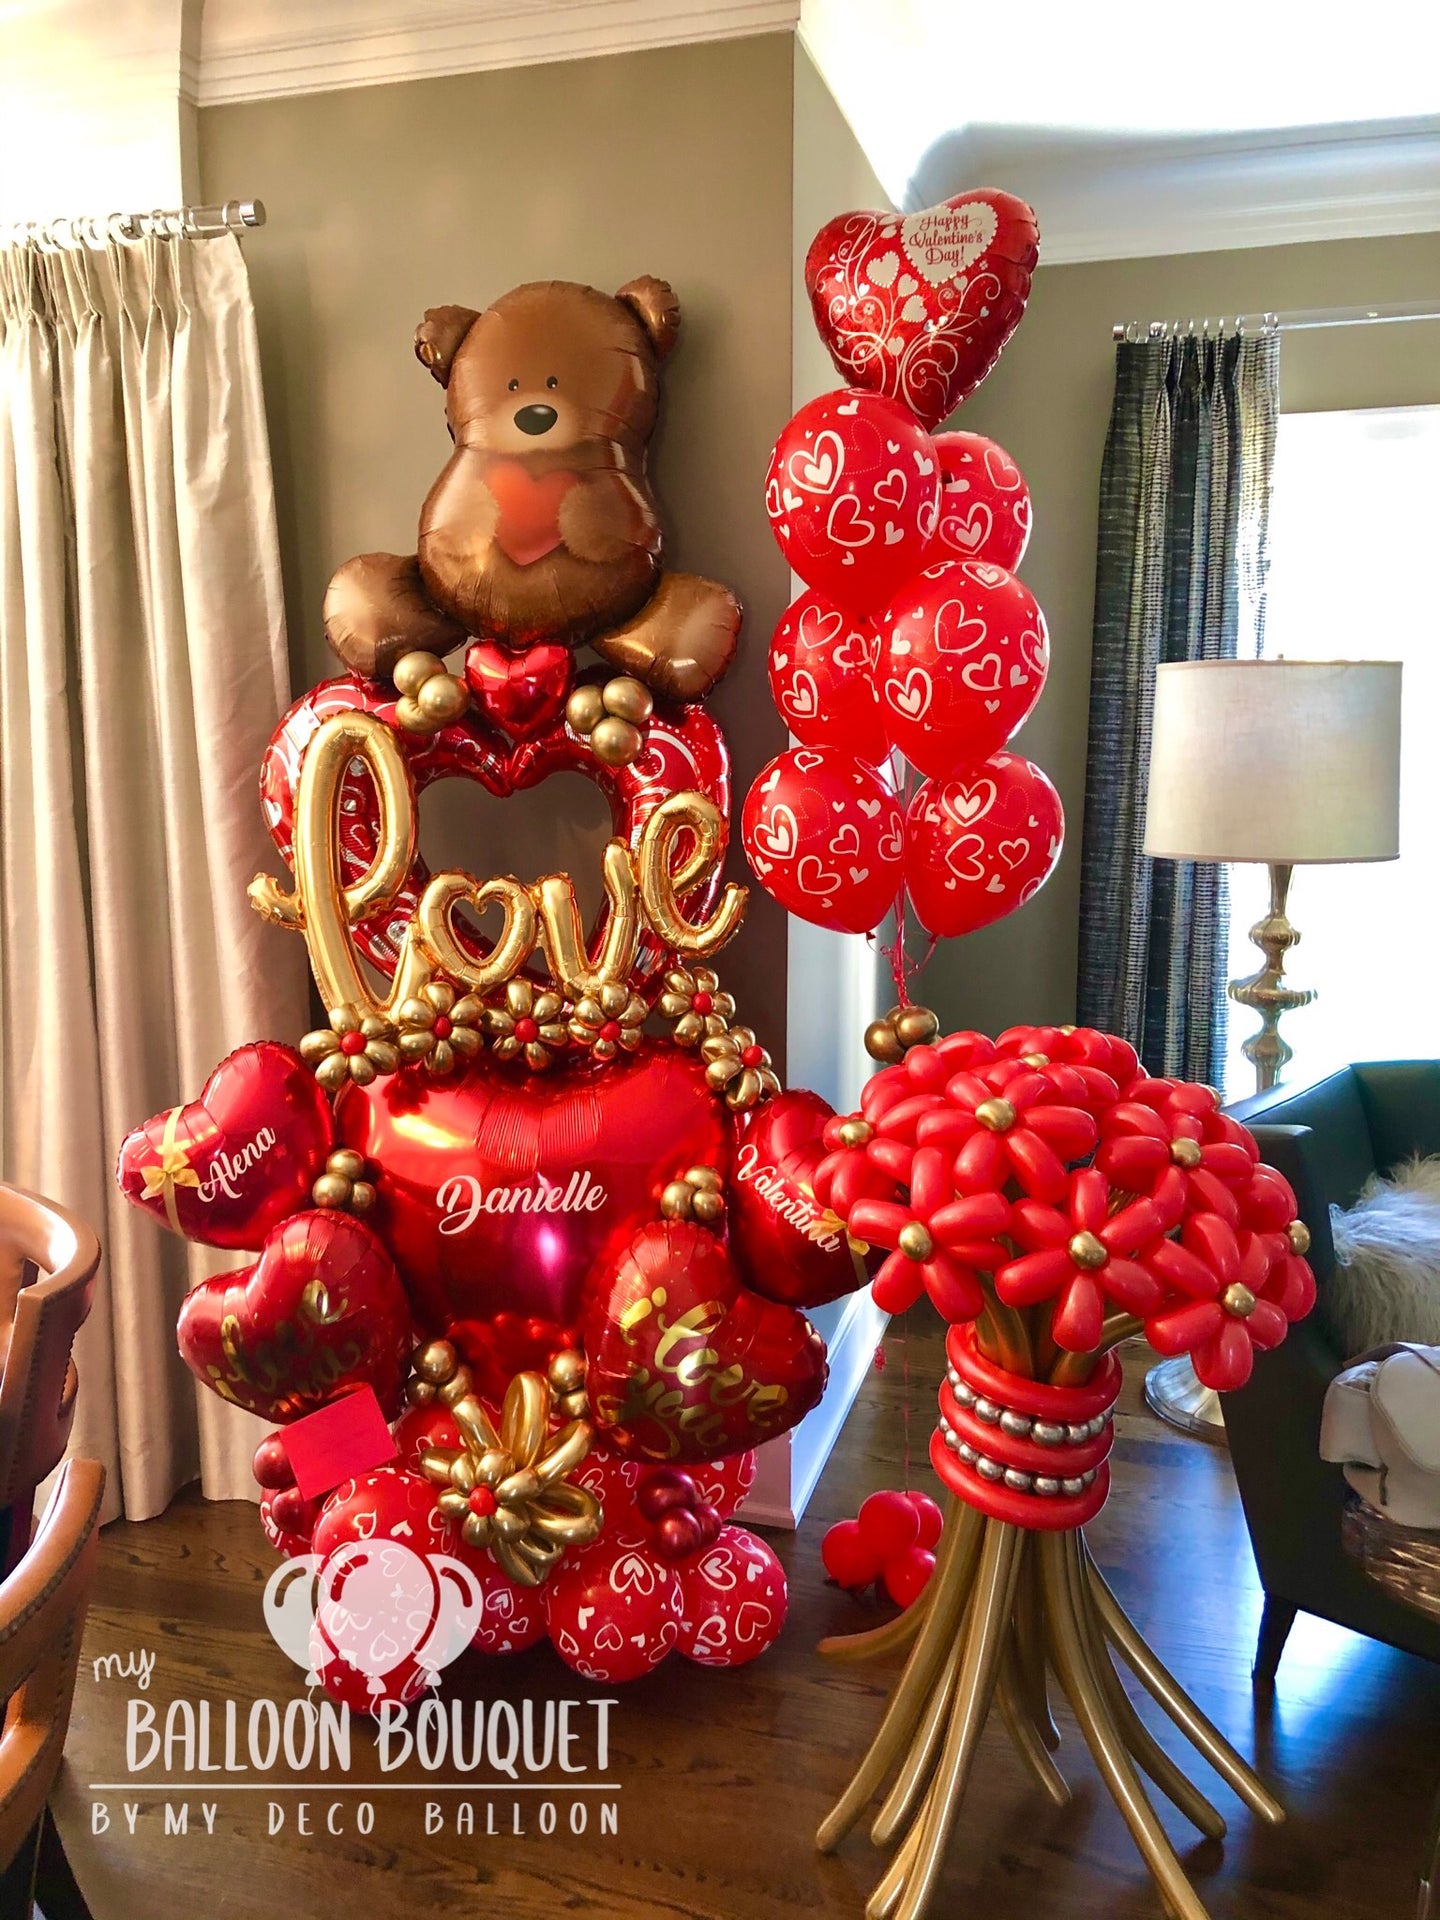 “I Love You Beary Much” Balloon Bouquet